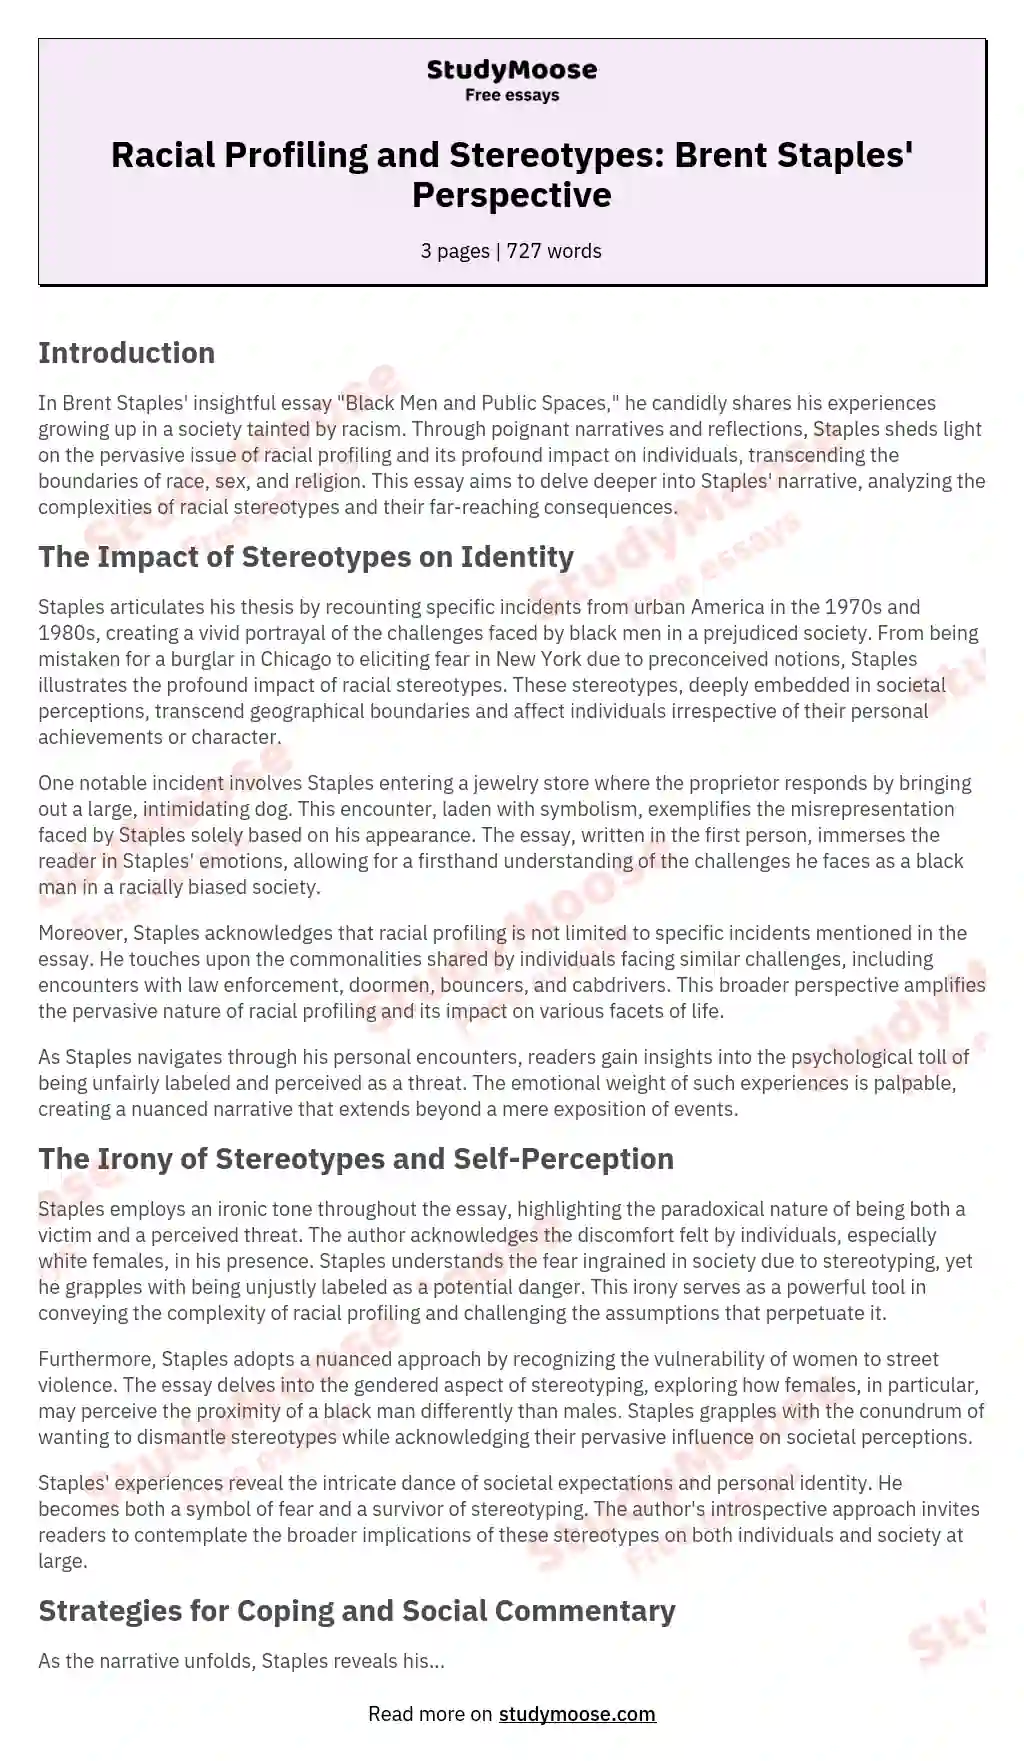 Racial Profiling and Stereotypes: Brent Staples' Perspective essay